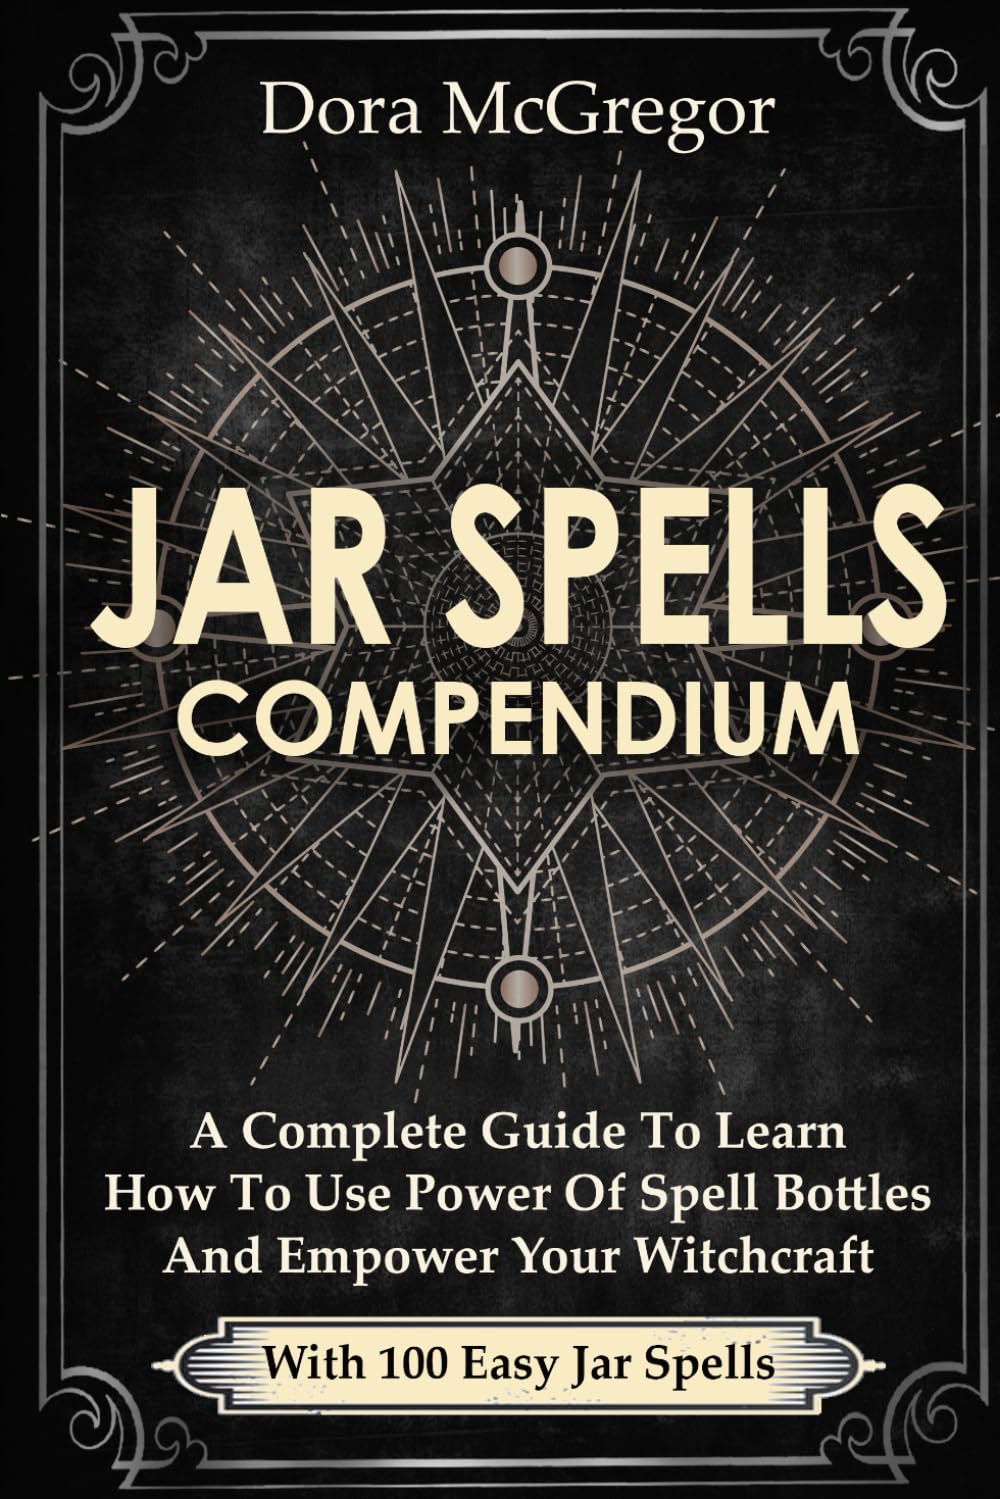 Jar Spells Compendium: A Complete Guide To Learn How To Use Power Of Spell Bottles And Empower Your Witchcraft With 100 Easy Jar Spells